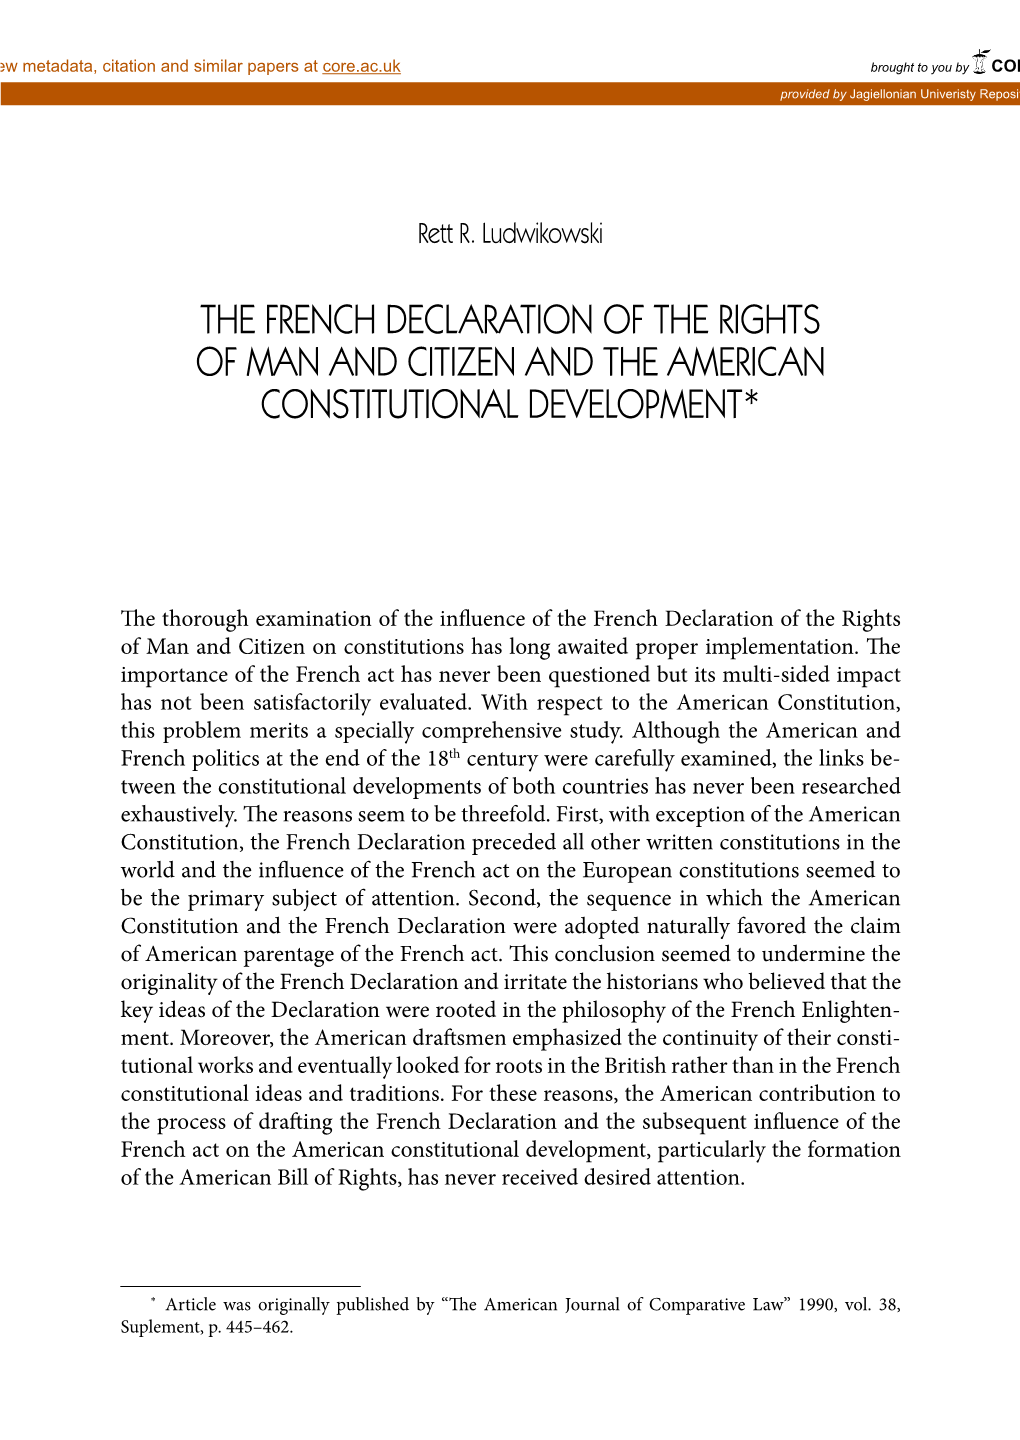 The French Declaration of the Rights of Man and Citizen and the American Constitutional Development*